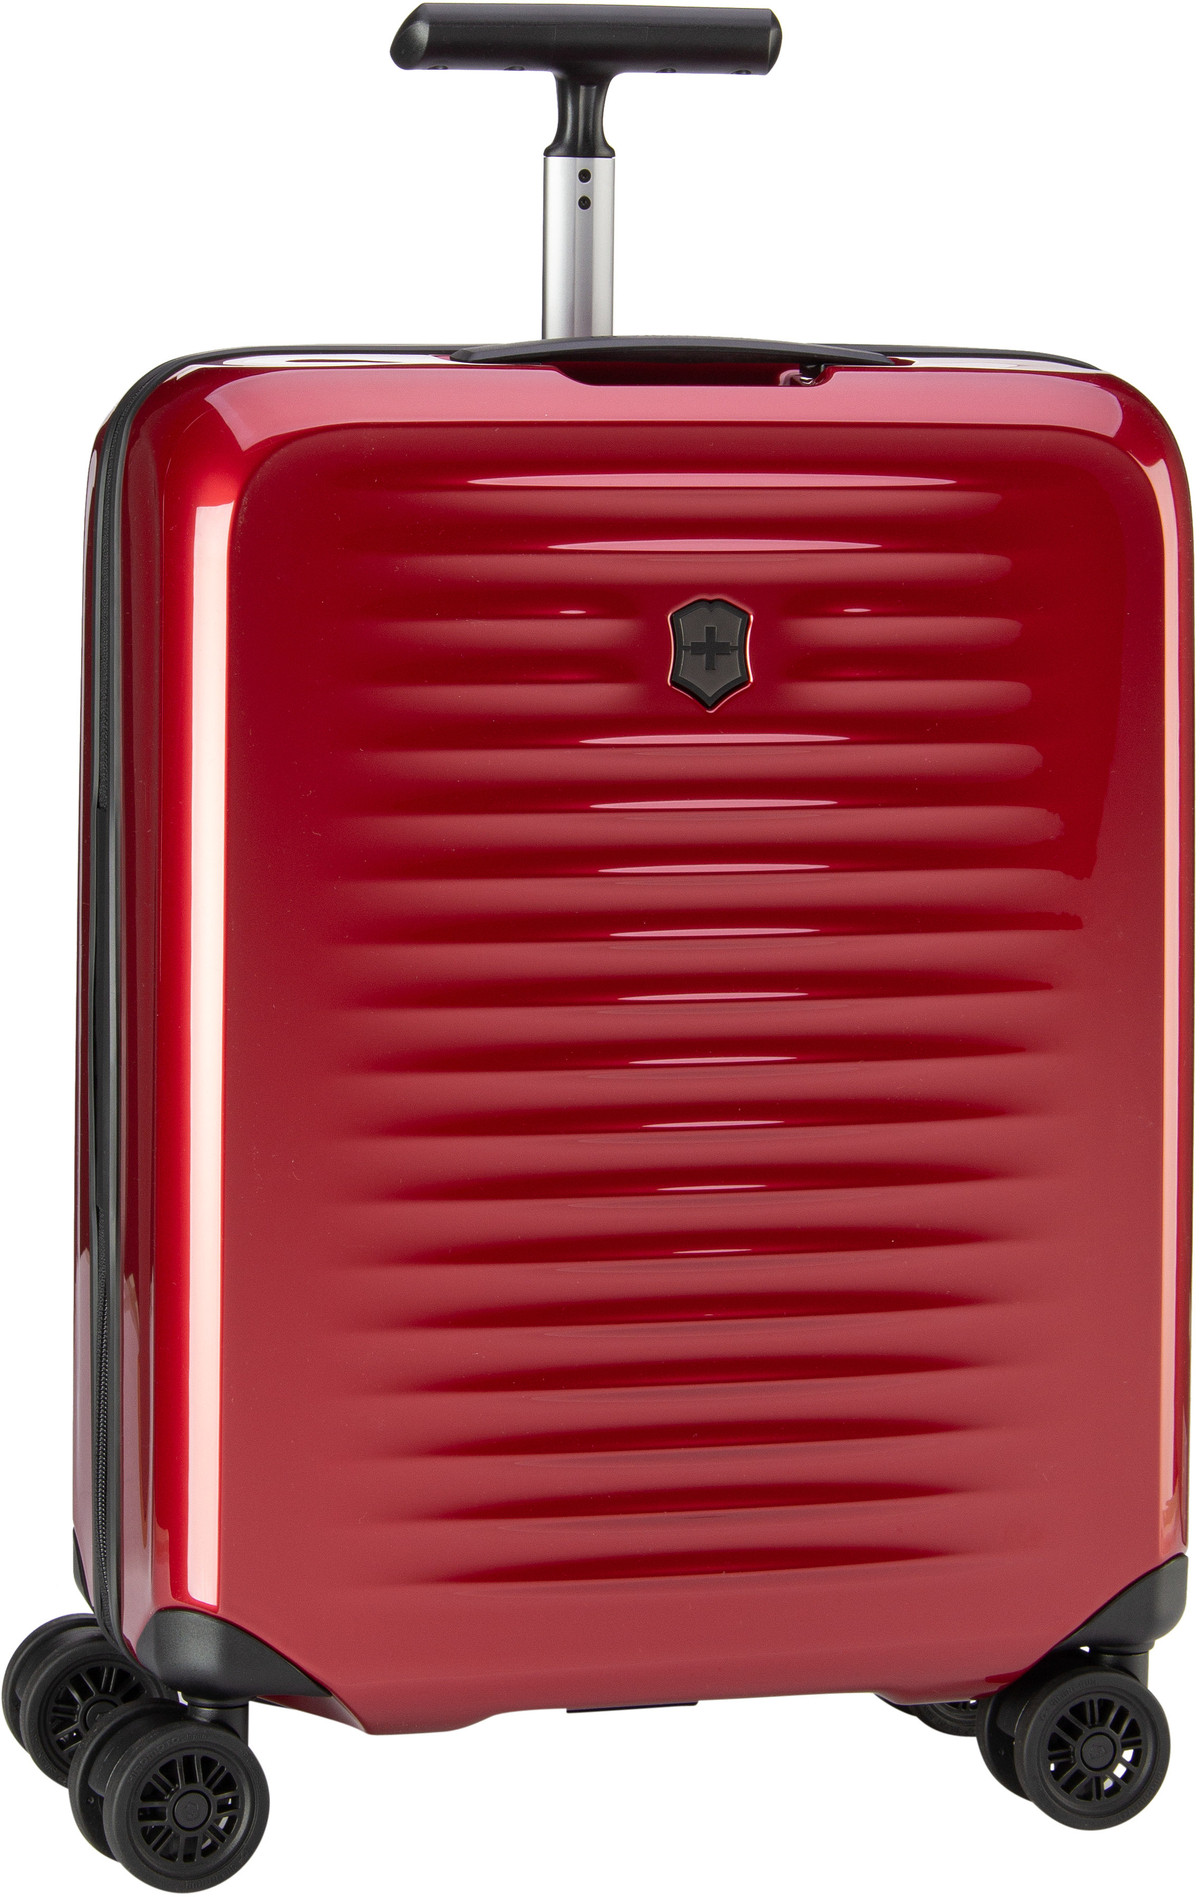 Victorinox Victorinox Airox Global Hardside Carry-On in Rot (33 Liter), Koffer & Trolley